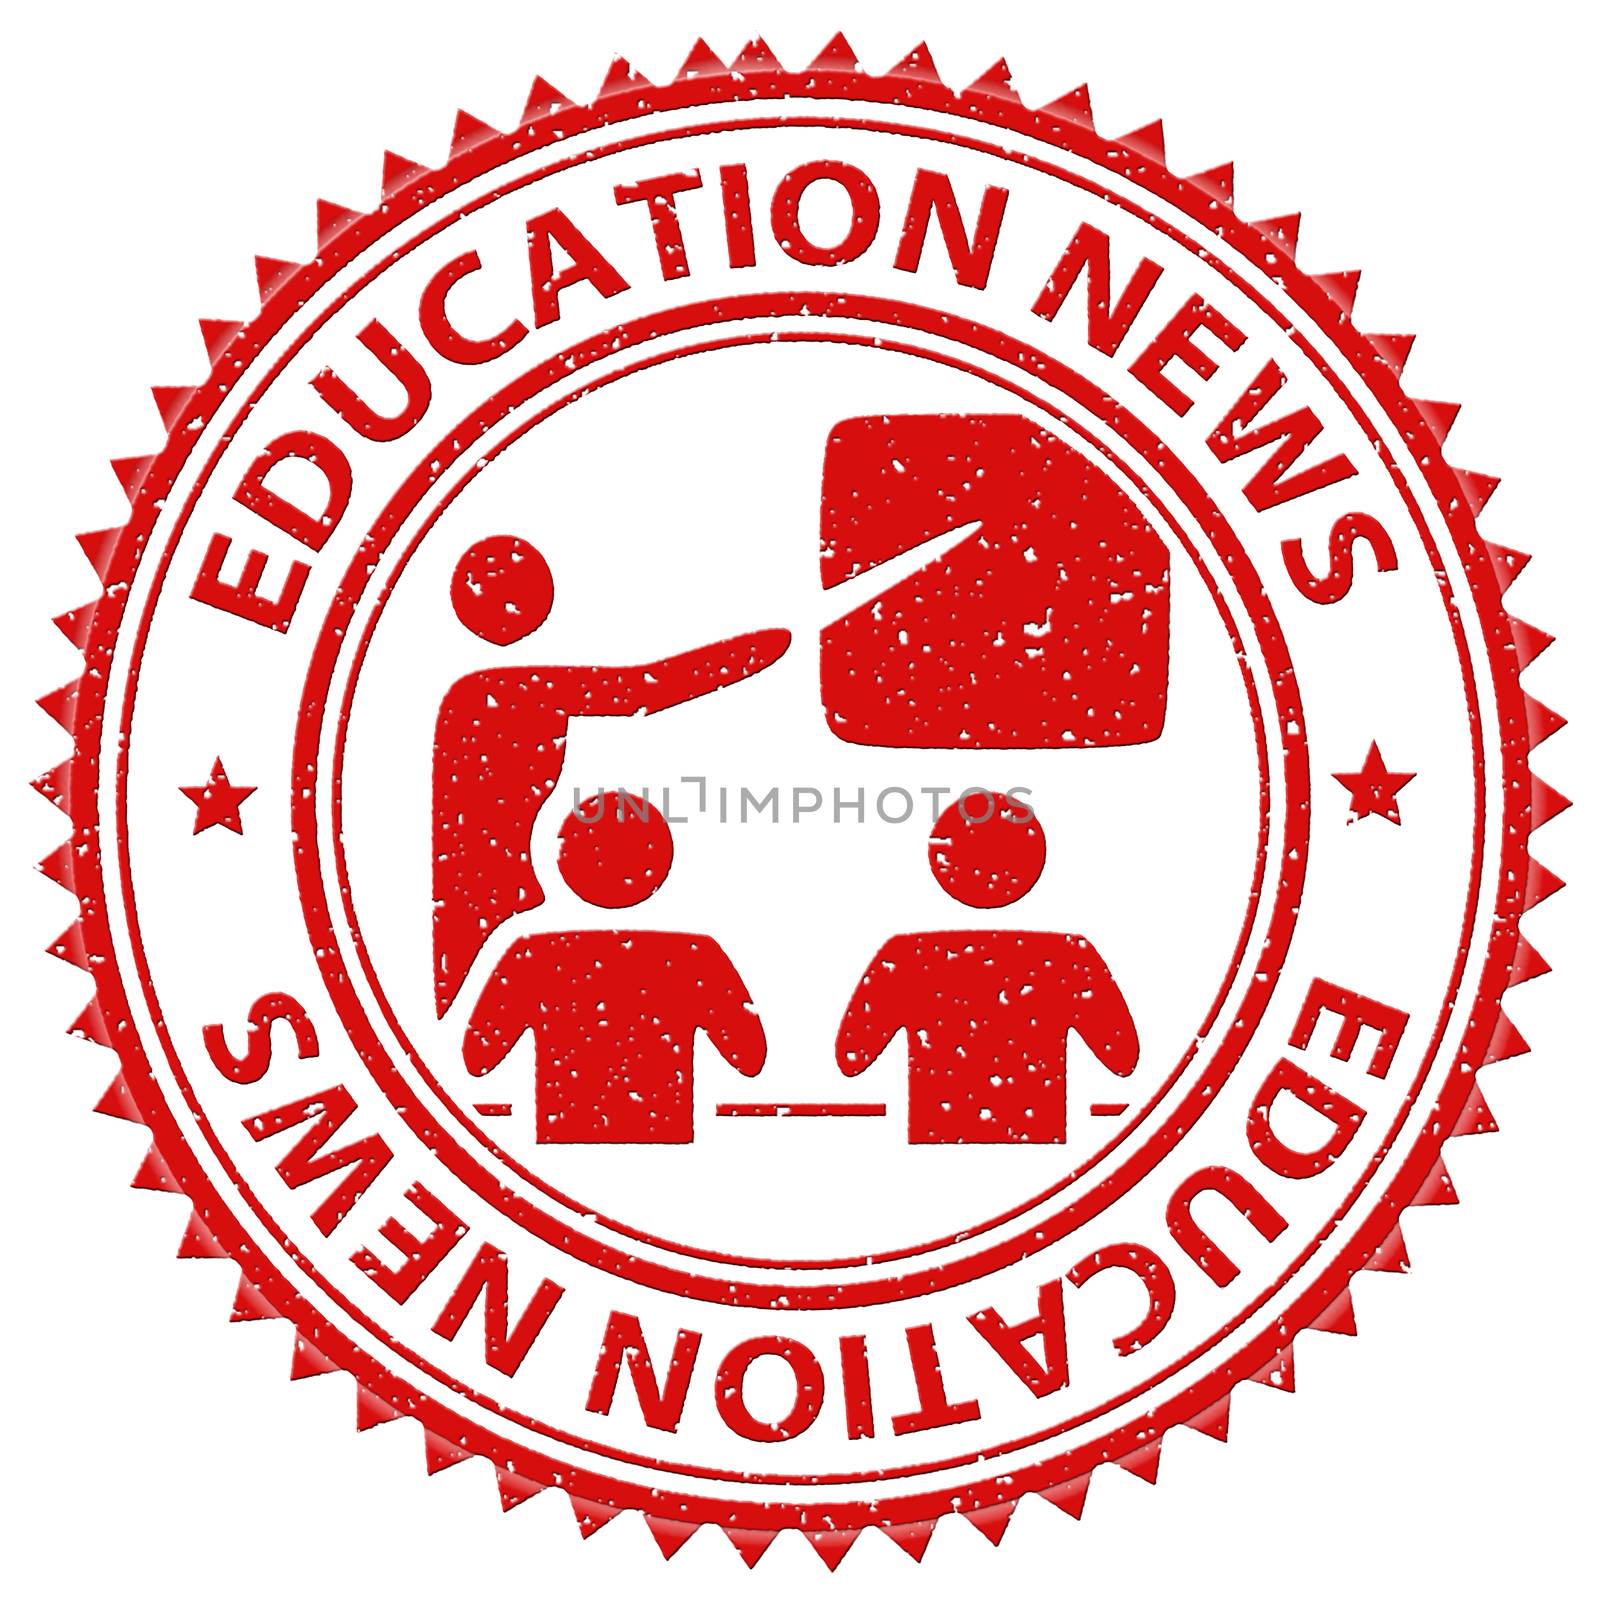 Education News Meaning Social Media And Learned